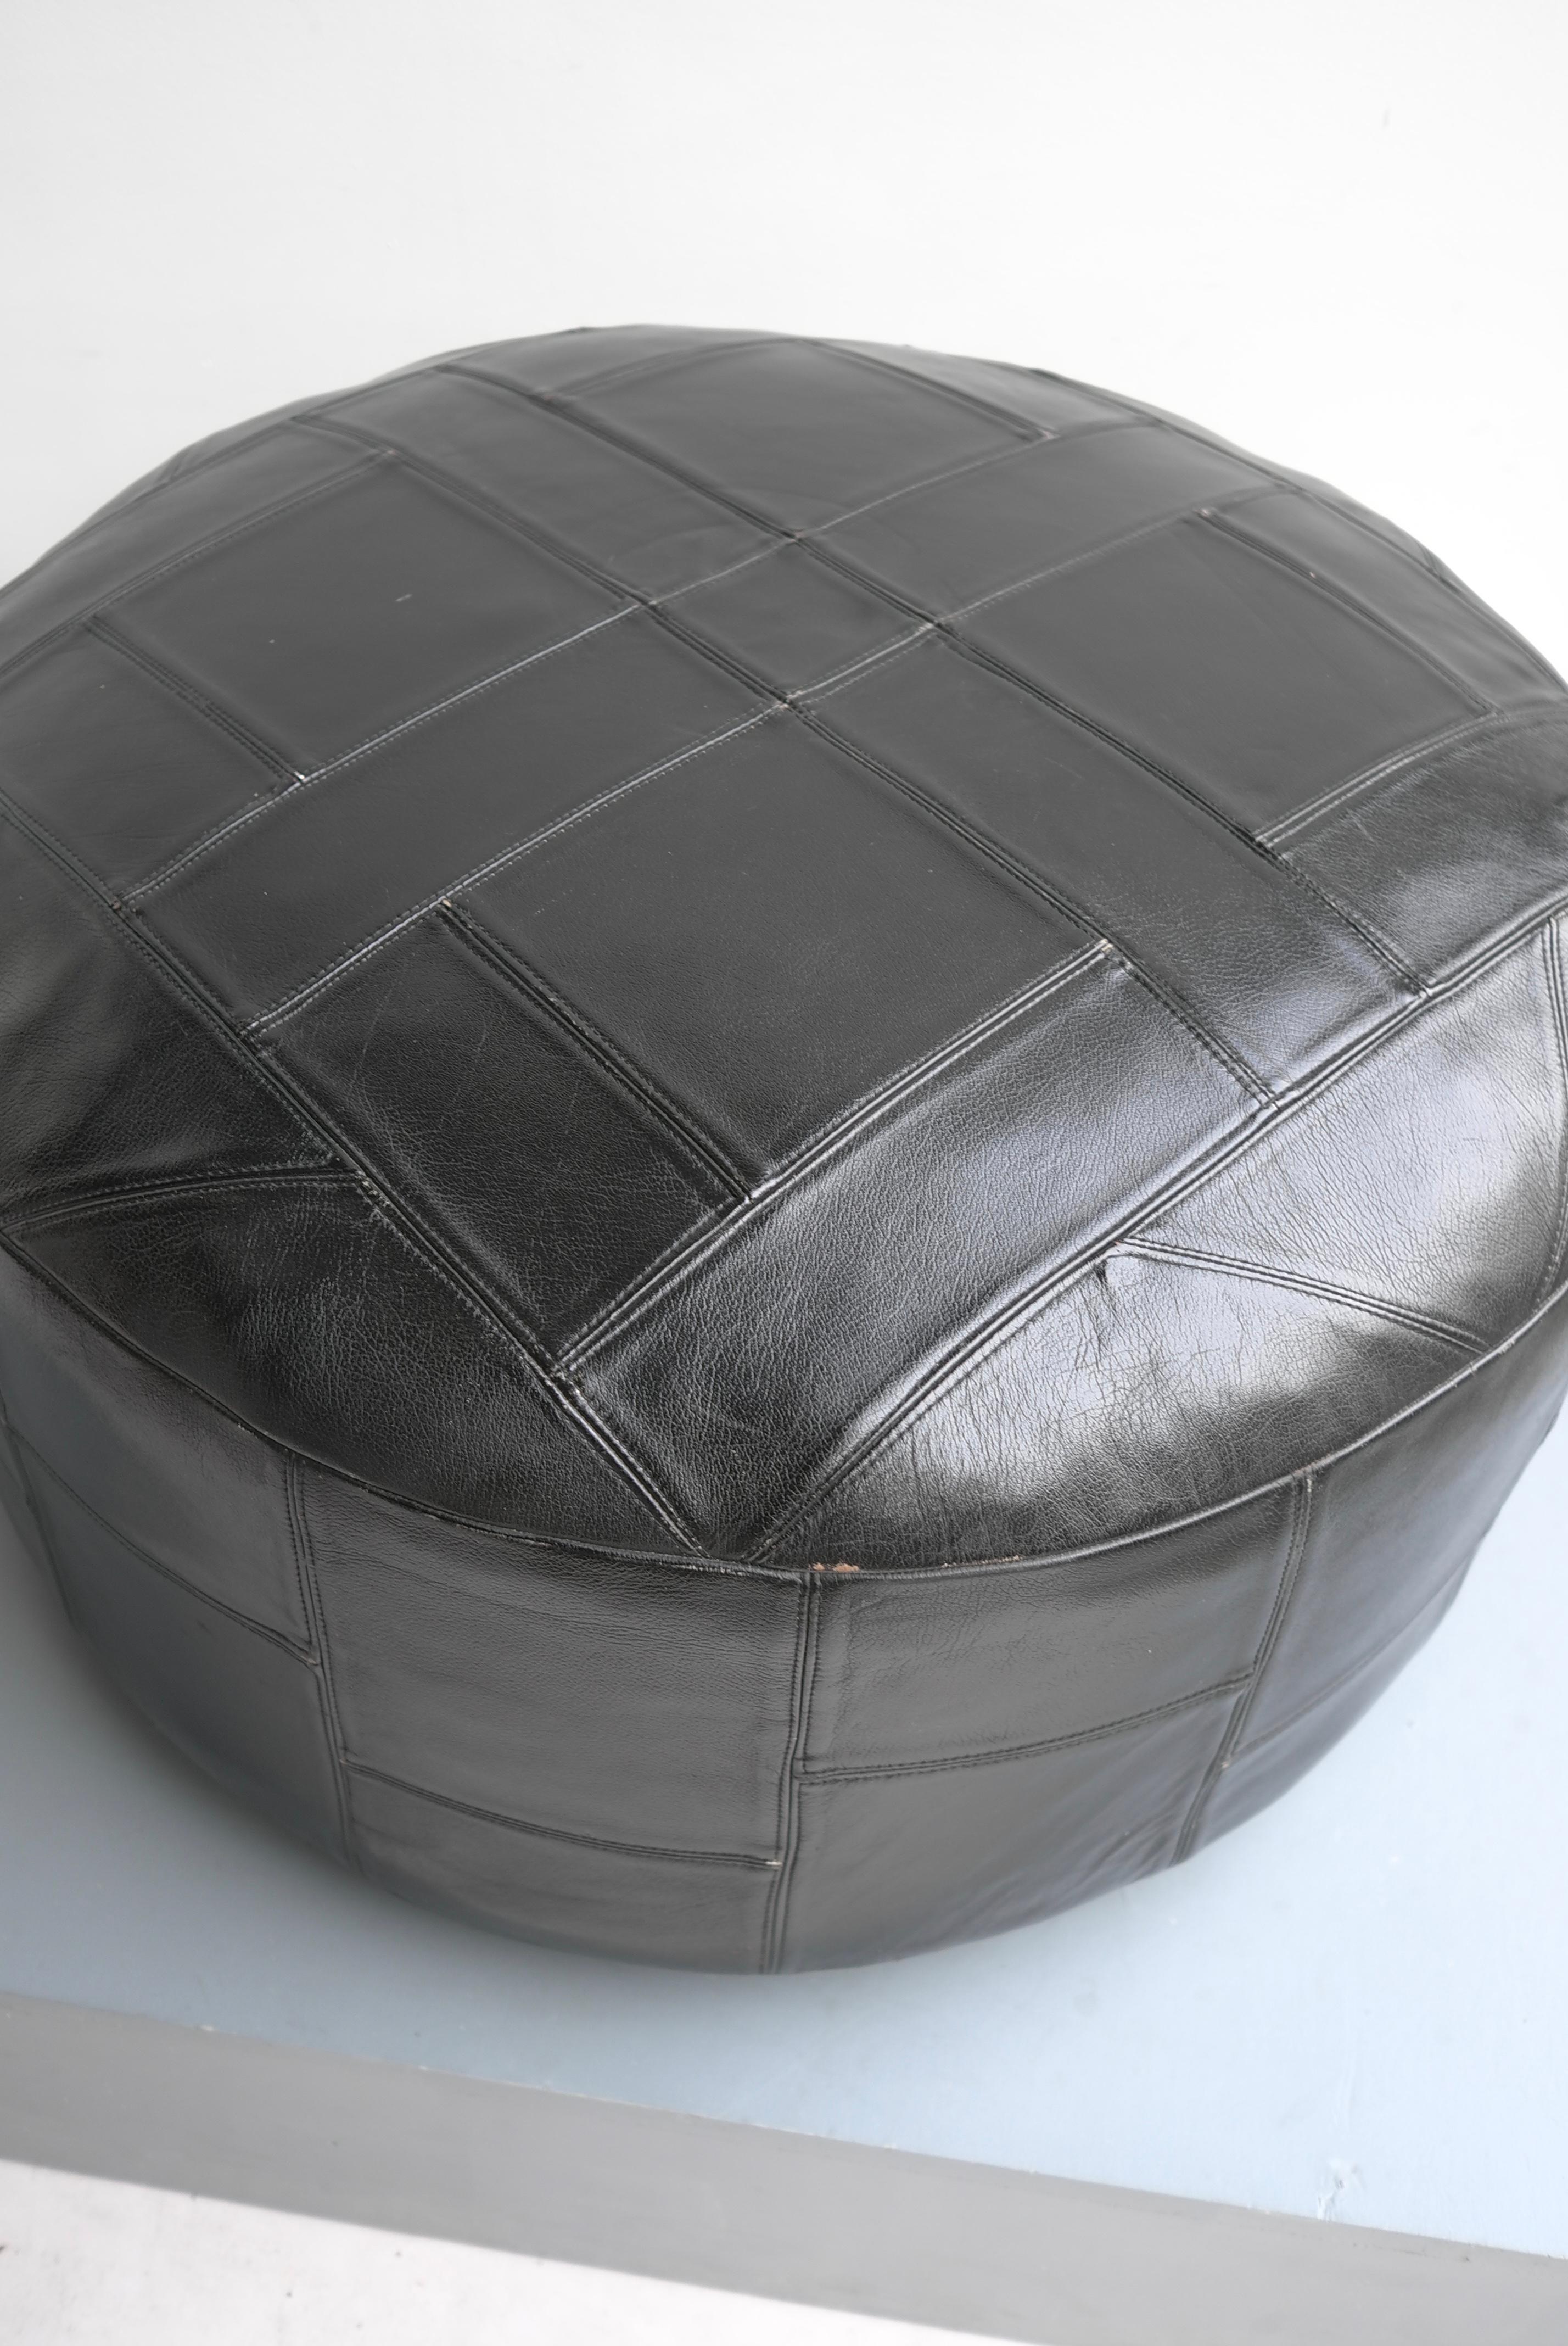 Large midcentury patchwork pouf in black leather.